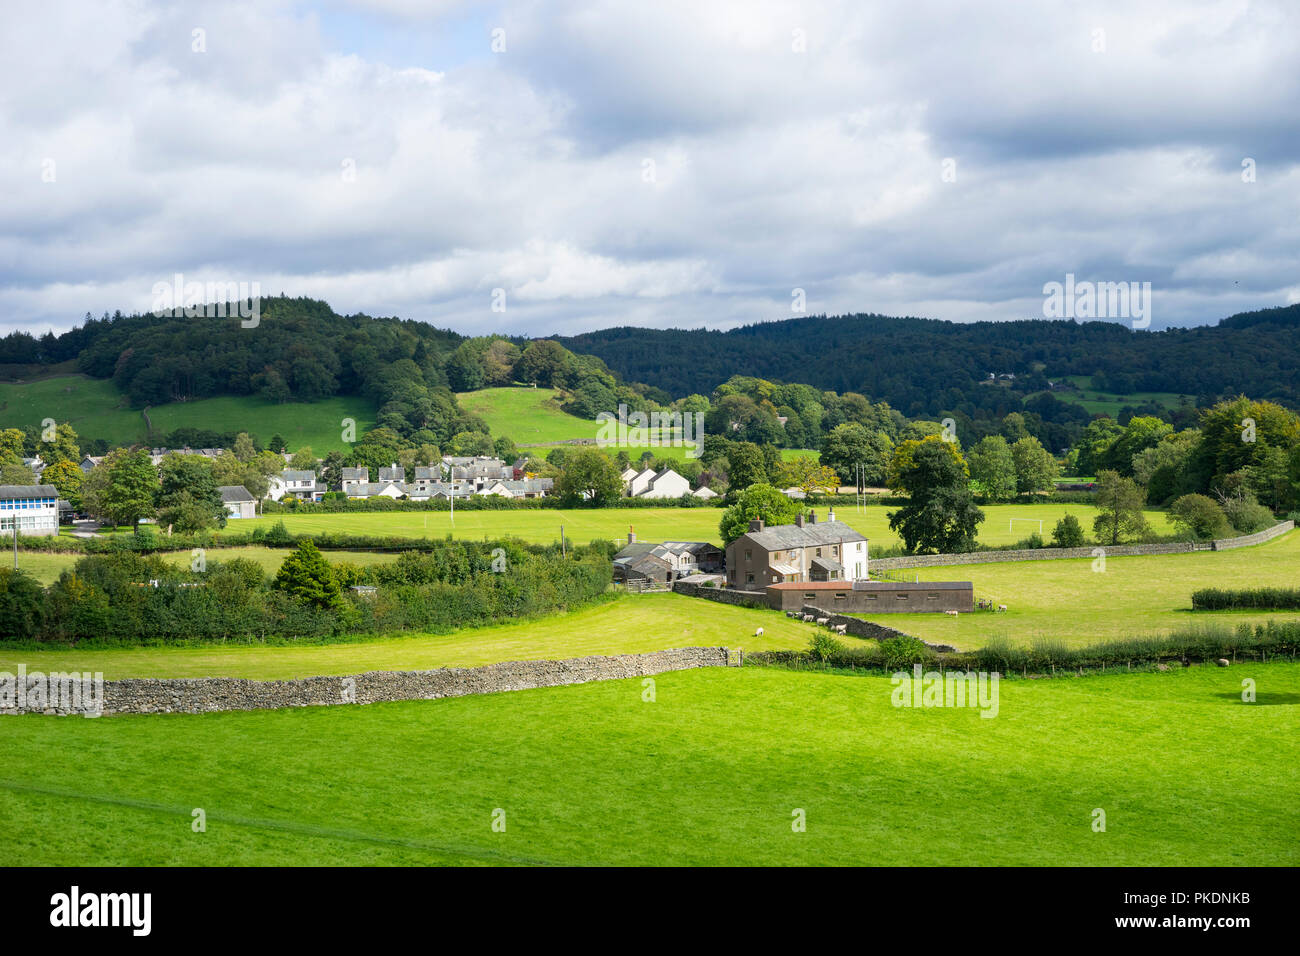 Typical Lake District landscape around the village of Coniston, West Cumbria, England, UK. Stock Photo